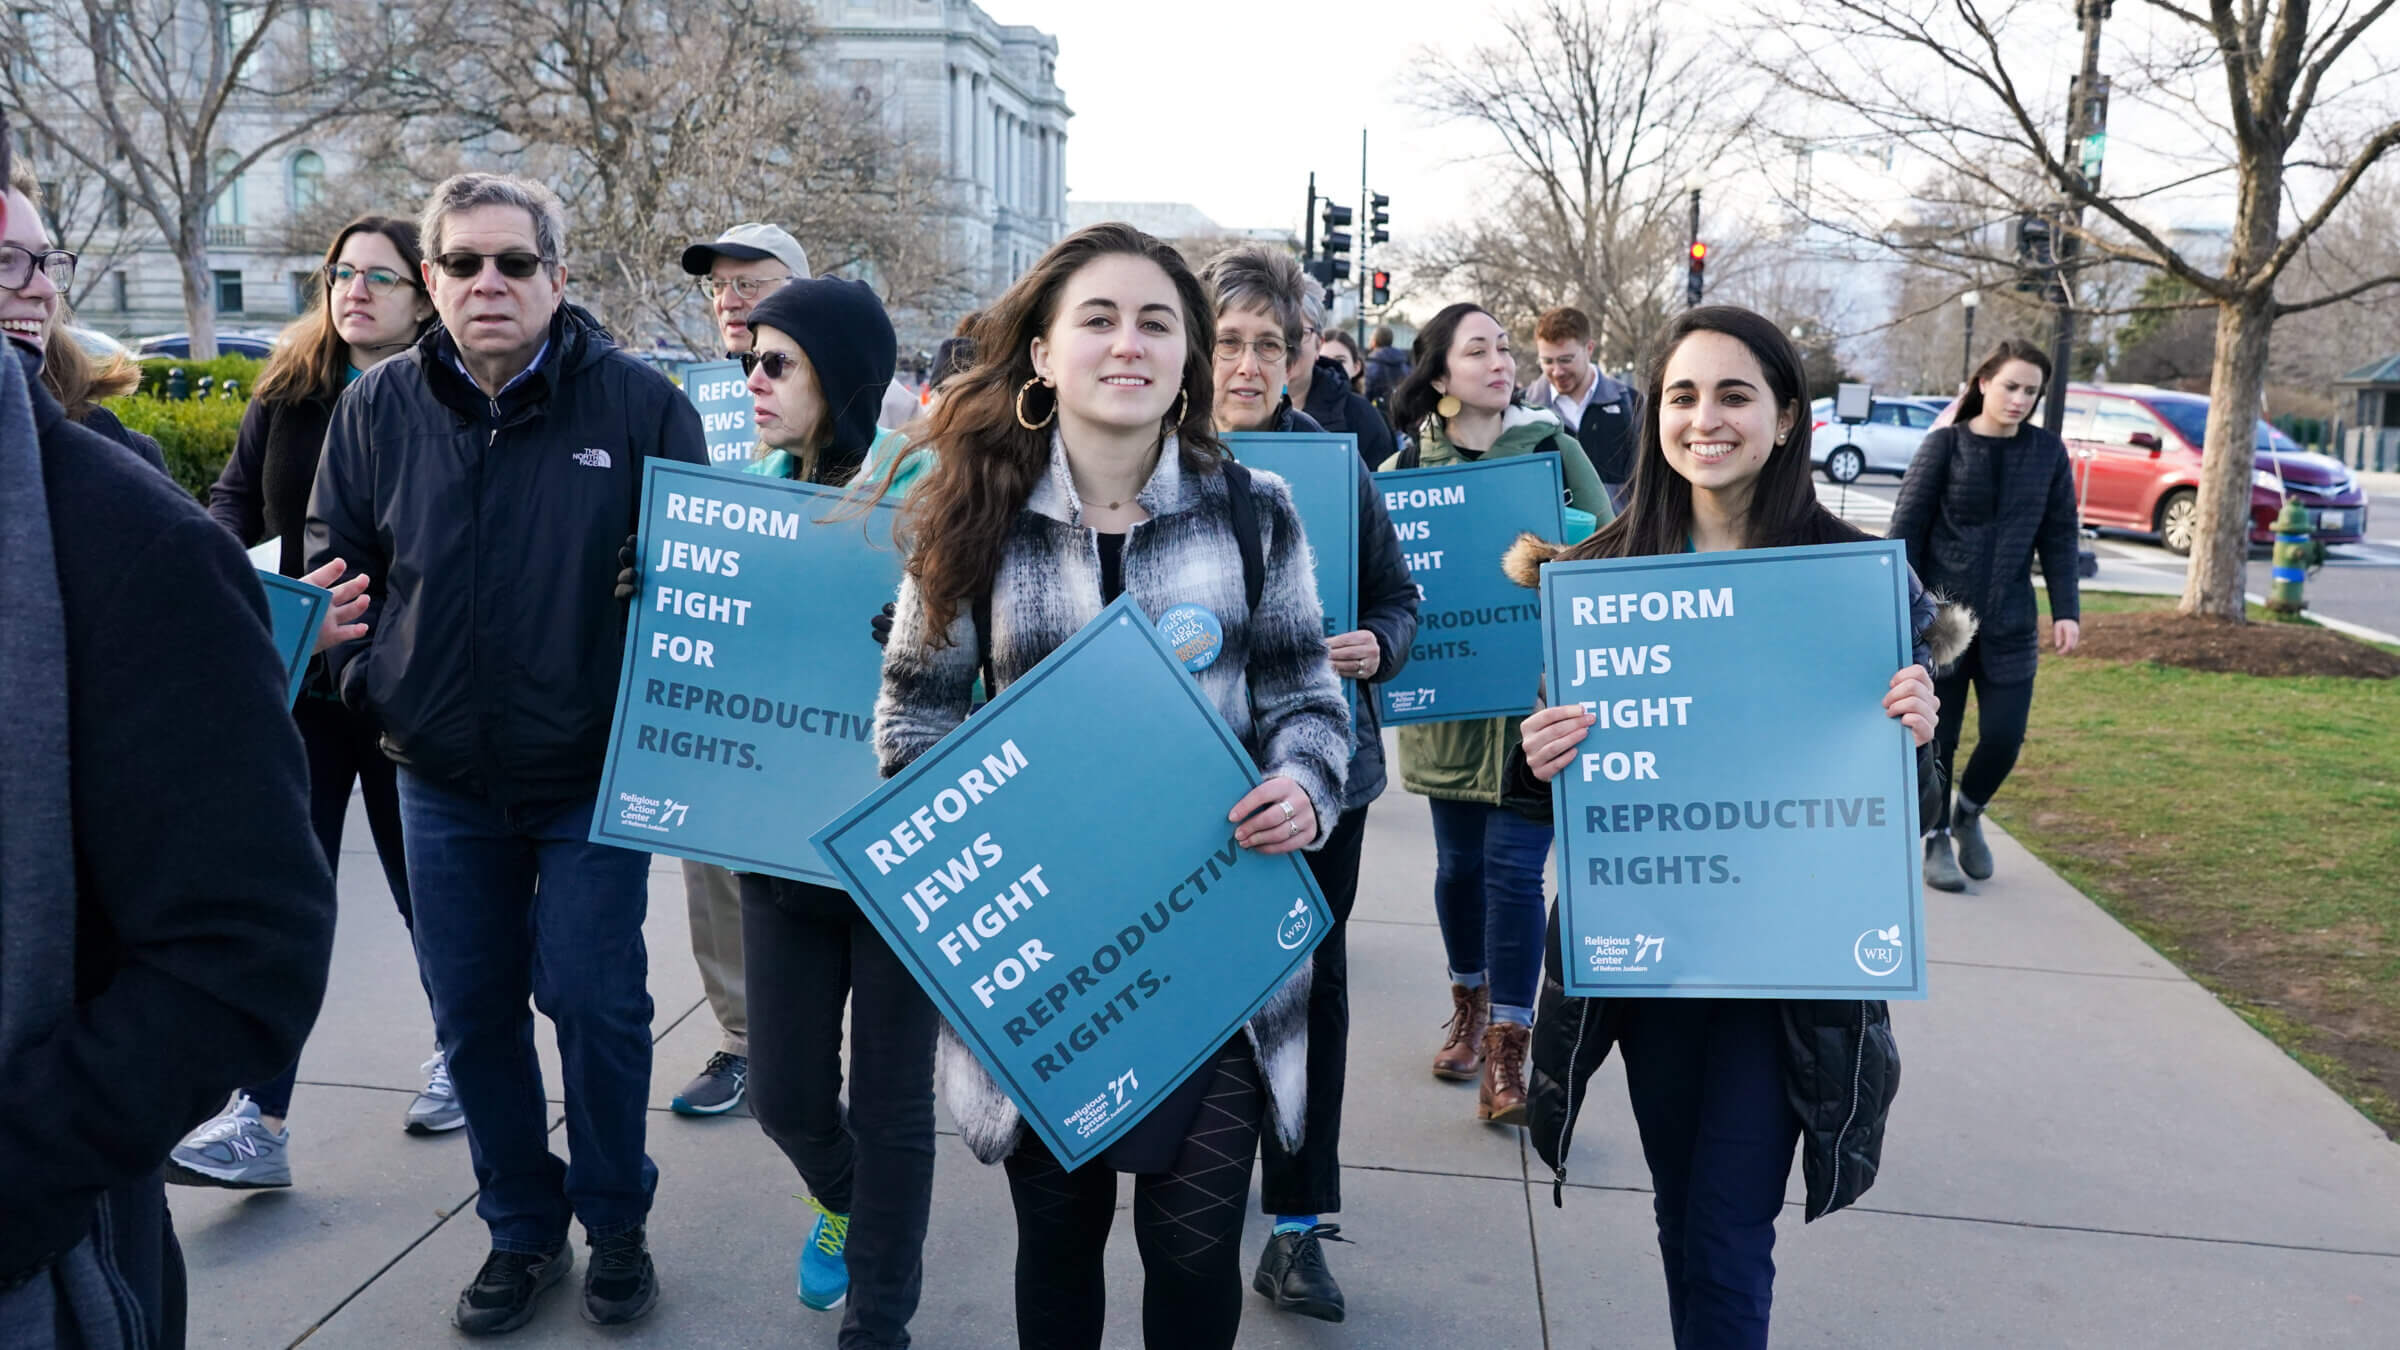 Activists from the Religious Action Center of Reform Judaism and the National Council of Jewish Women attend a demonstration outside the Supreme Court in early 2020.